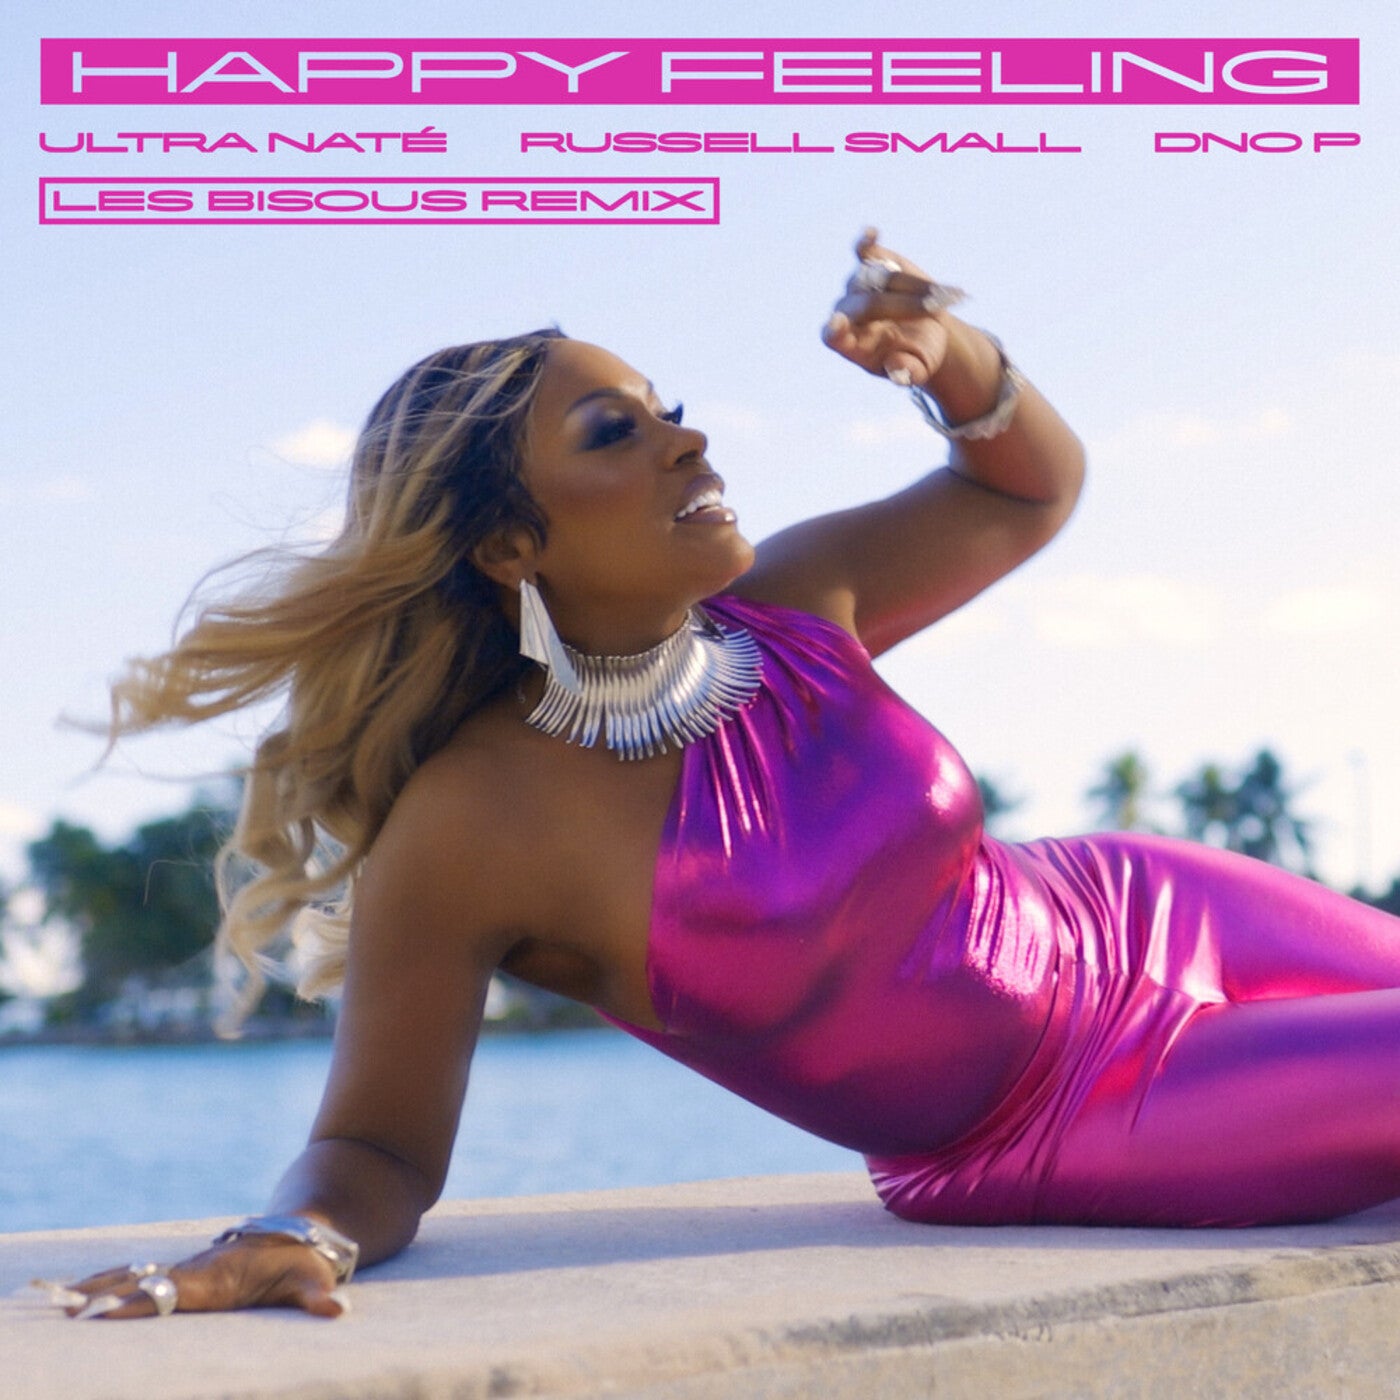 Cover - Ultra Nate, Russell Small, DNO P - HAPPY FEELING (Les Bisous Remix)